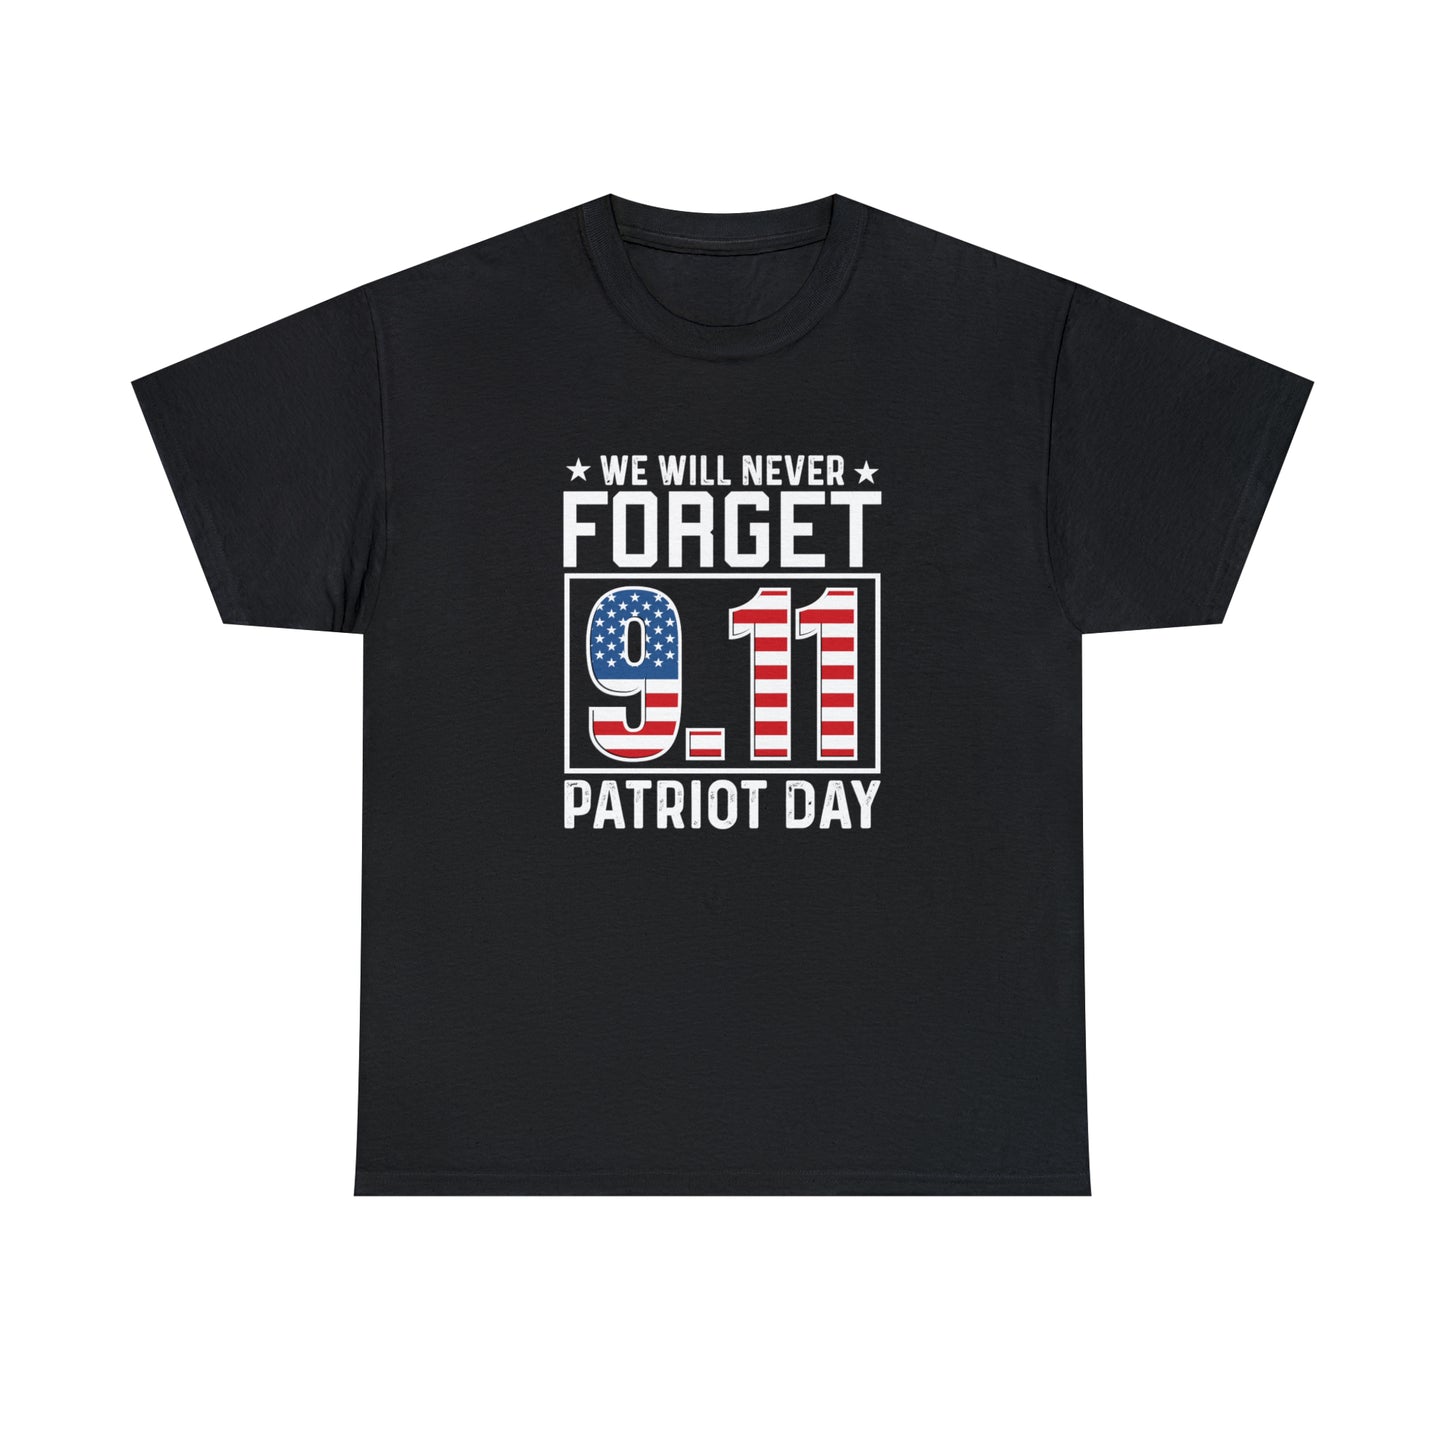 Patriot Day T-Shirt For 9 11 T Shirt For Never Forget TShirt For Patriotic Tee For Conservative Shirt